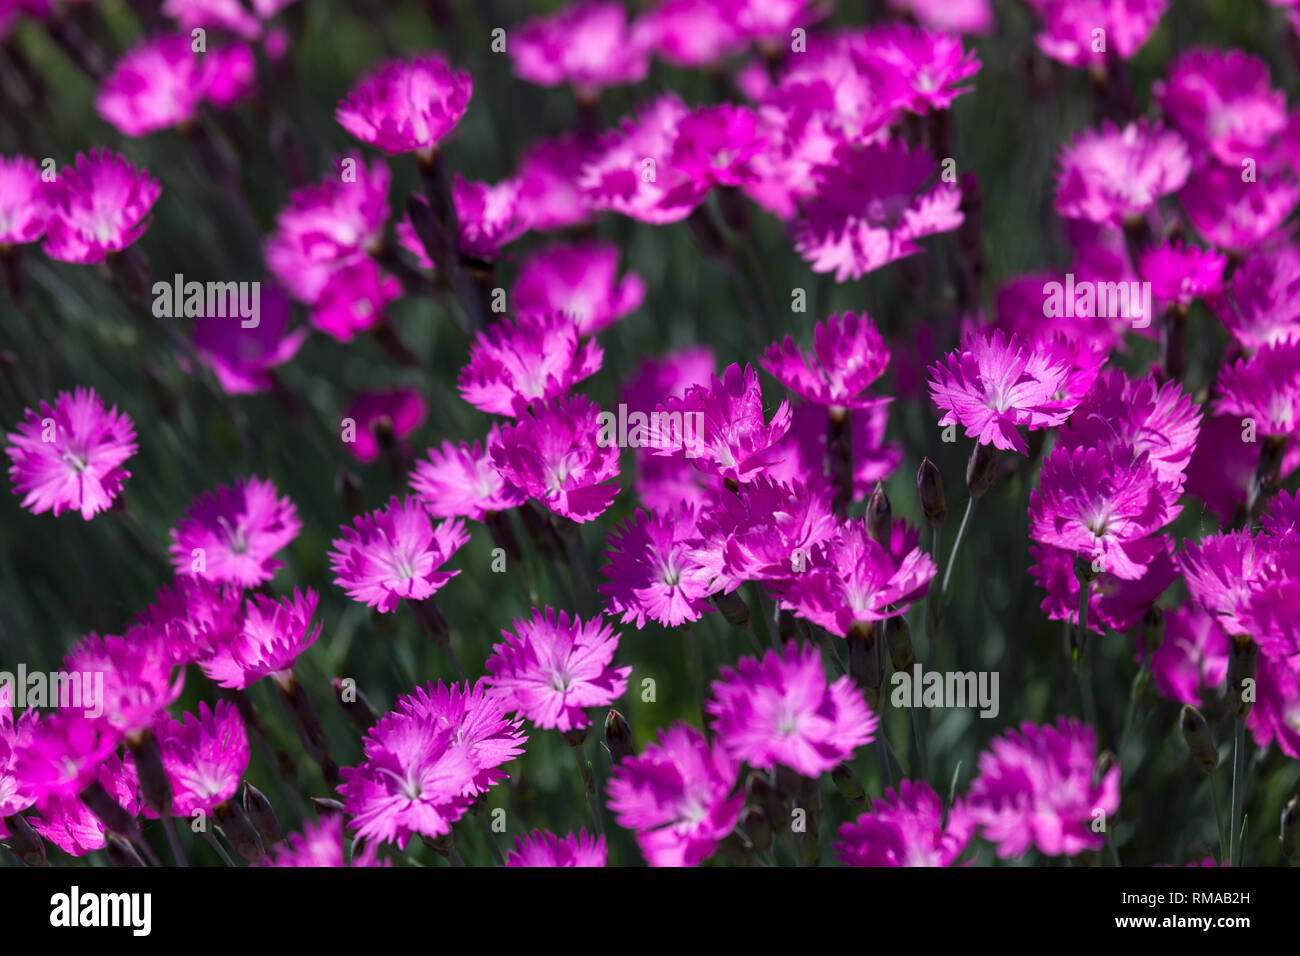 A group of bright pink dianthus flowers with blurred edges and background. Stock Photo